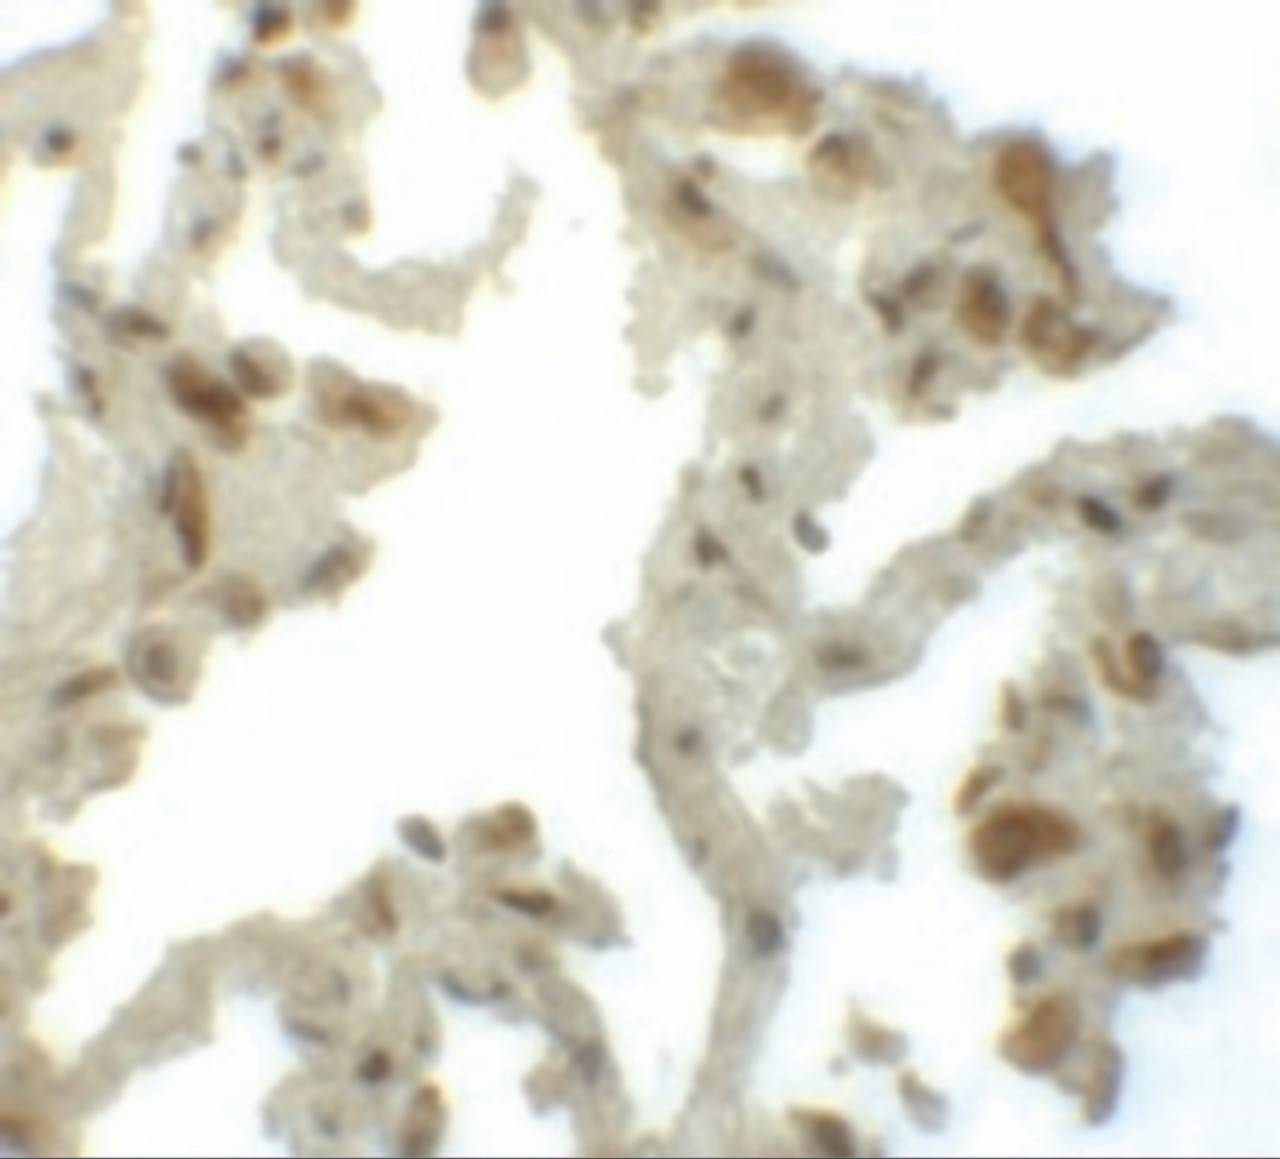 Immunohistochemistry of TM4SF1 in human lung tissue with TM4SF1 antibody at 5 ug/mL.